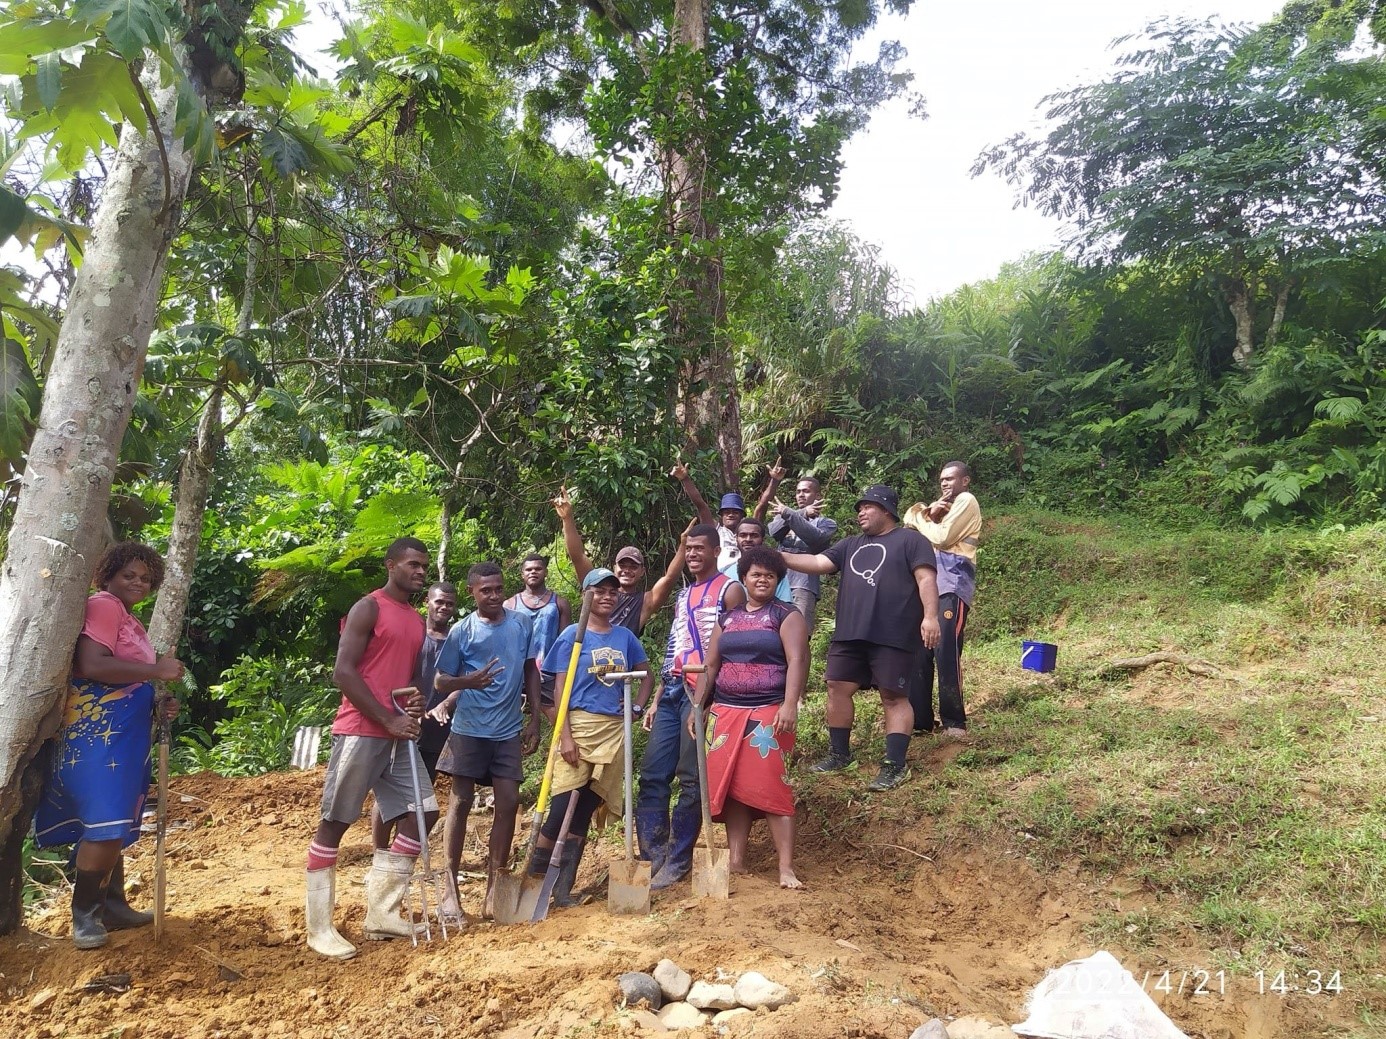 Public Engagement can even mean getting your hands dirty – as these Fijian scientists did when developing a waste disposal strategy together with some villagers